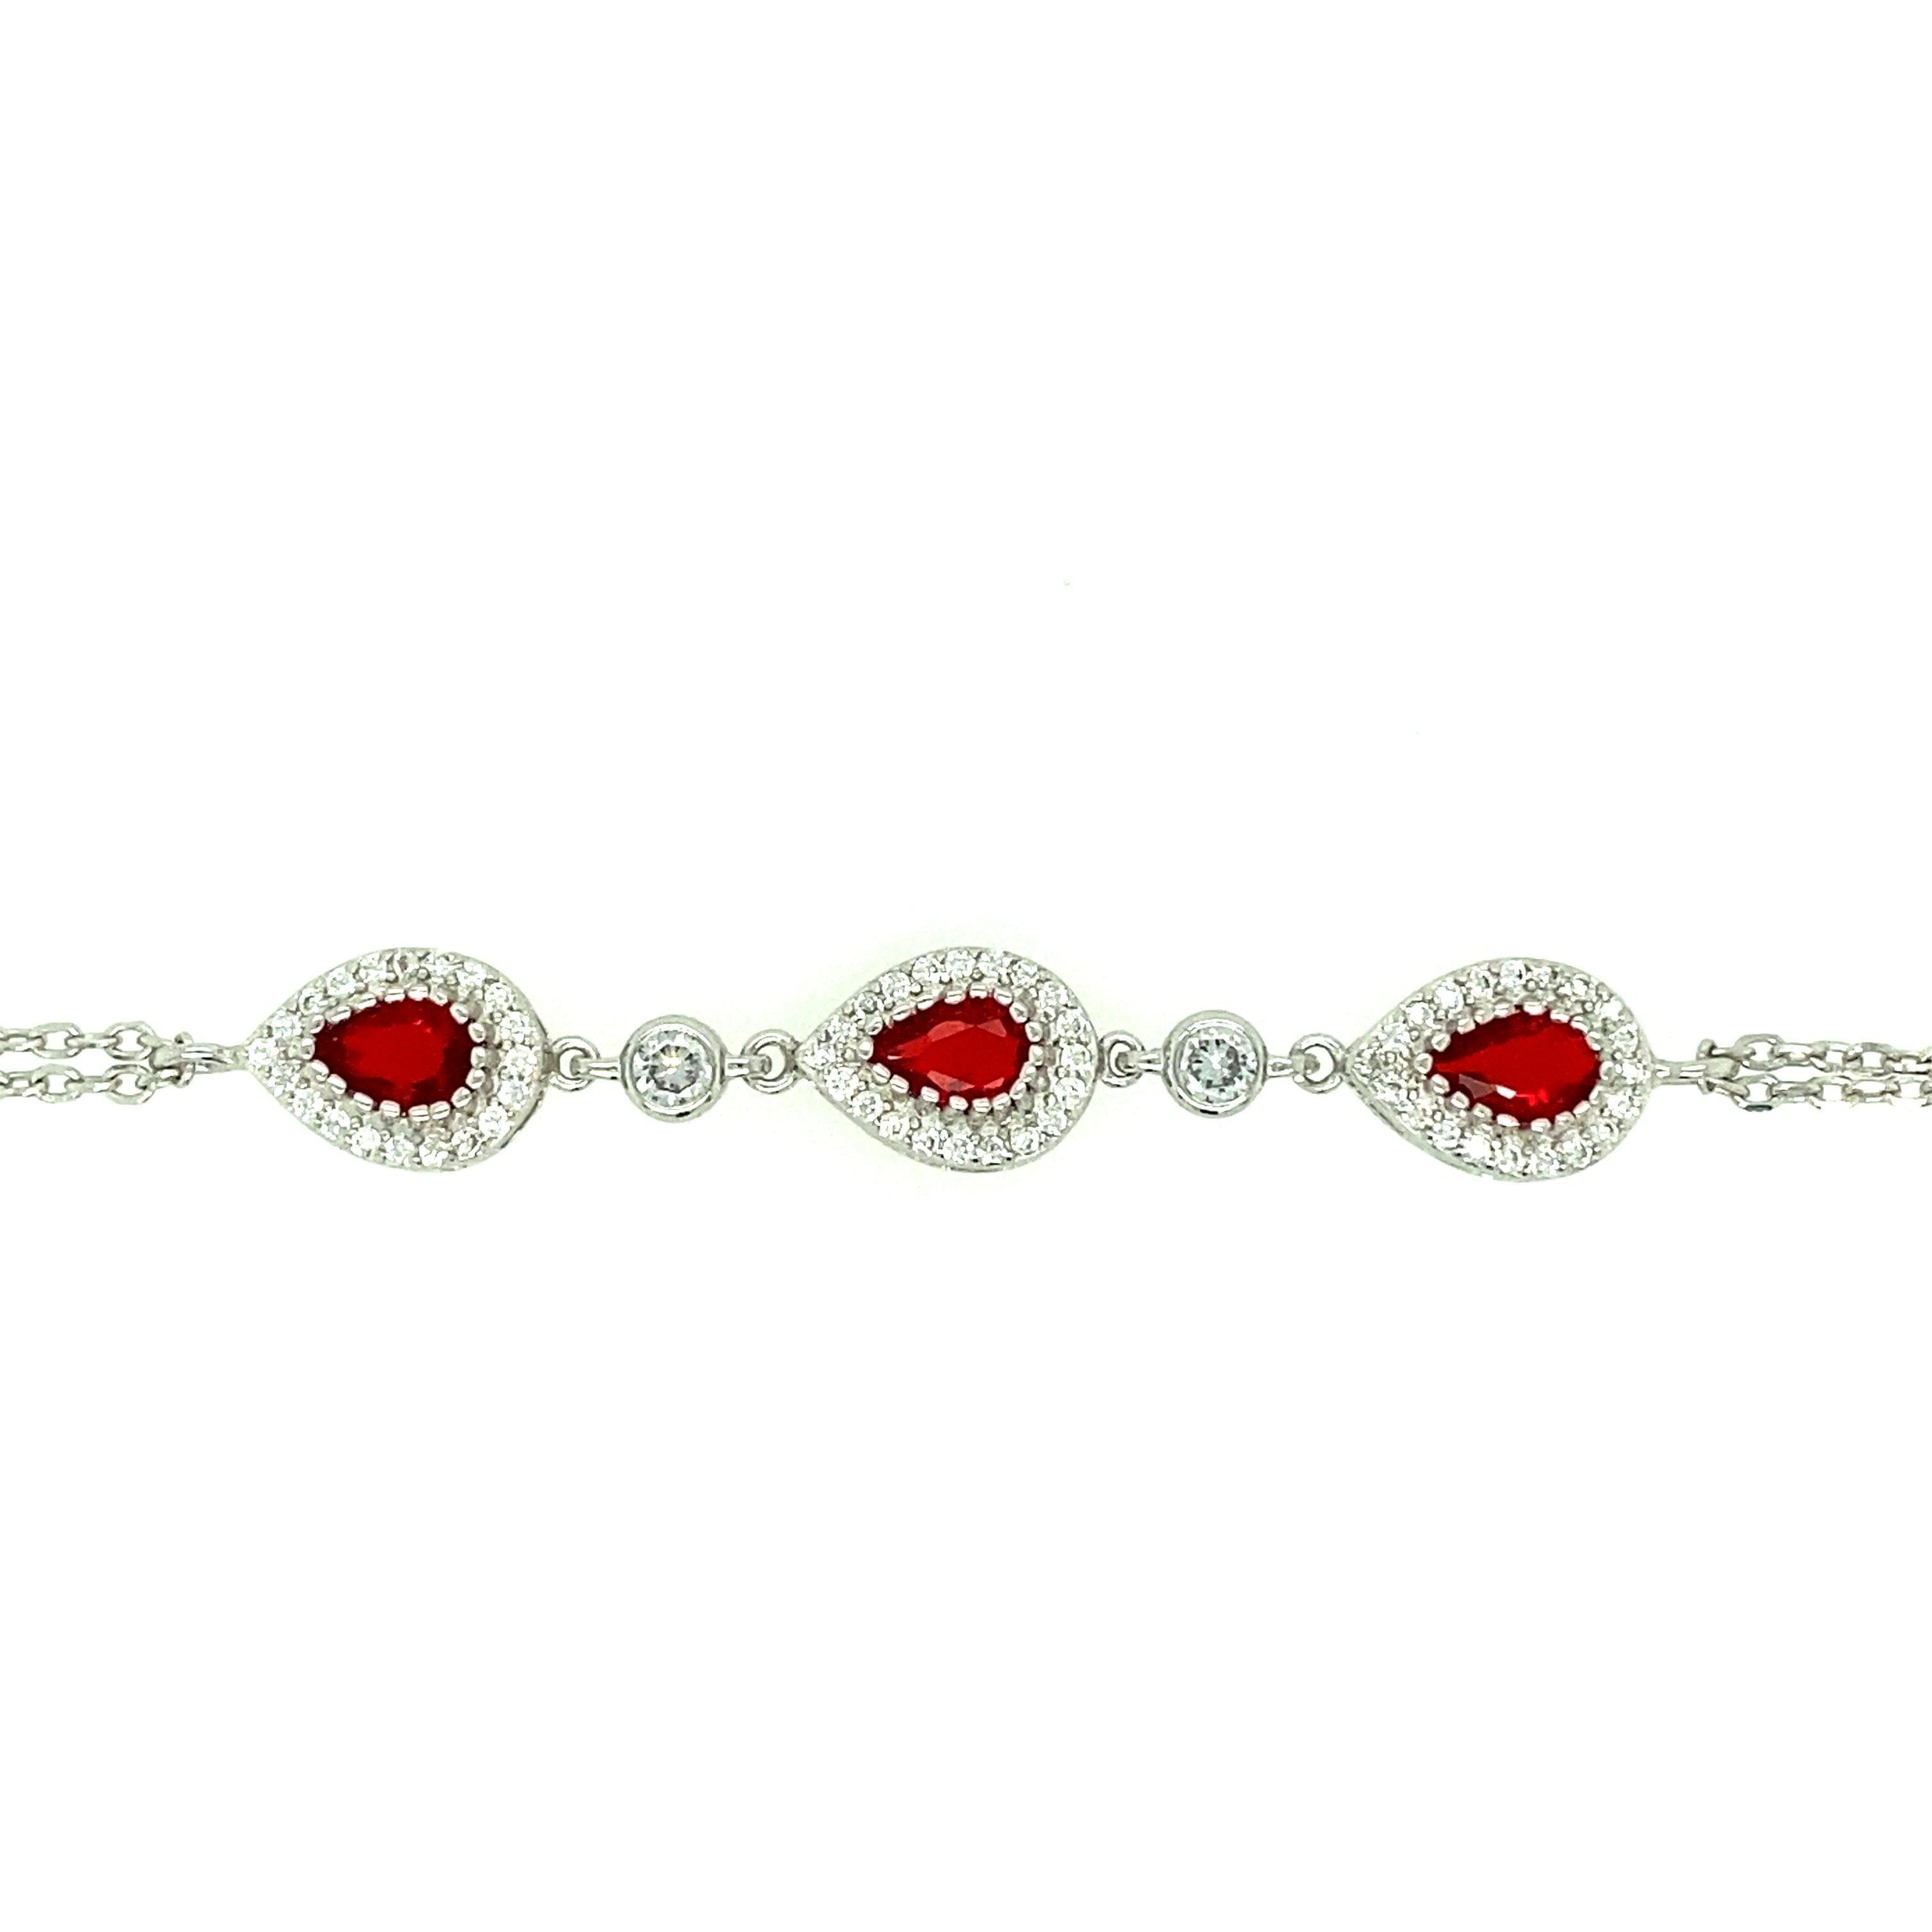 Asfour-Crystal-accessories-Bracelet-b1621-r-925-Sterling-Silver